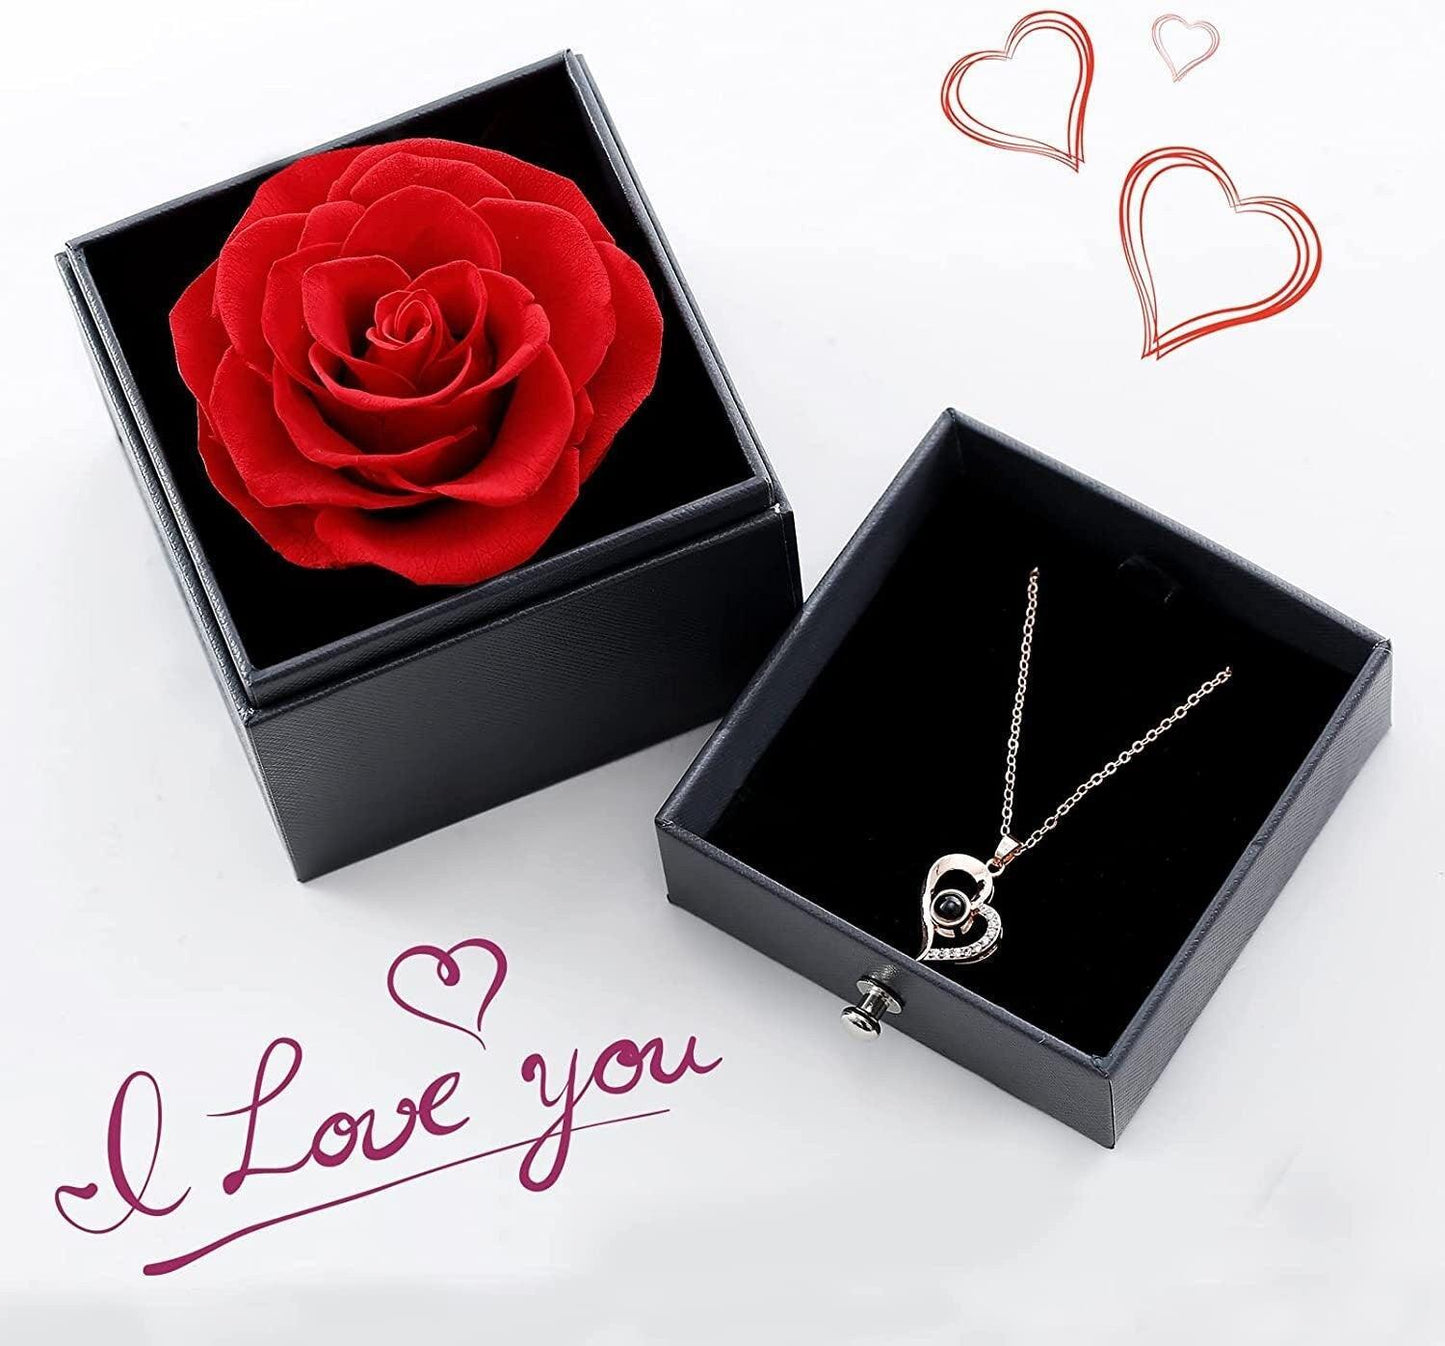 Preserved rose + I Love You Heart Necklace in Gift Box, Great Mother's day Gift, Valentine's Day, Wife Birthday, Anniversary, Gifts for Her - 4Lovebirds